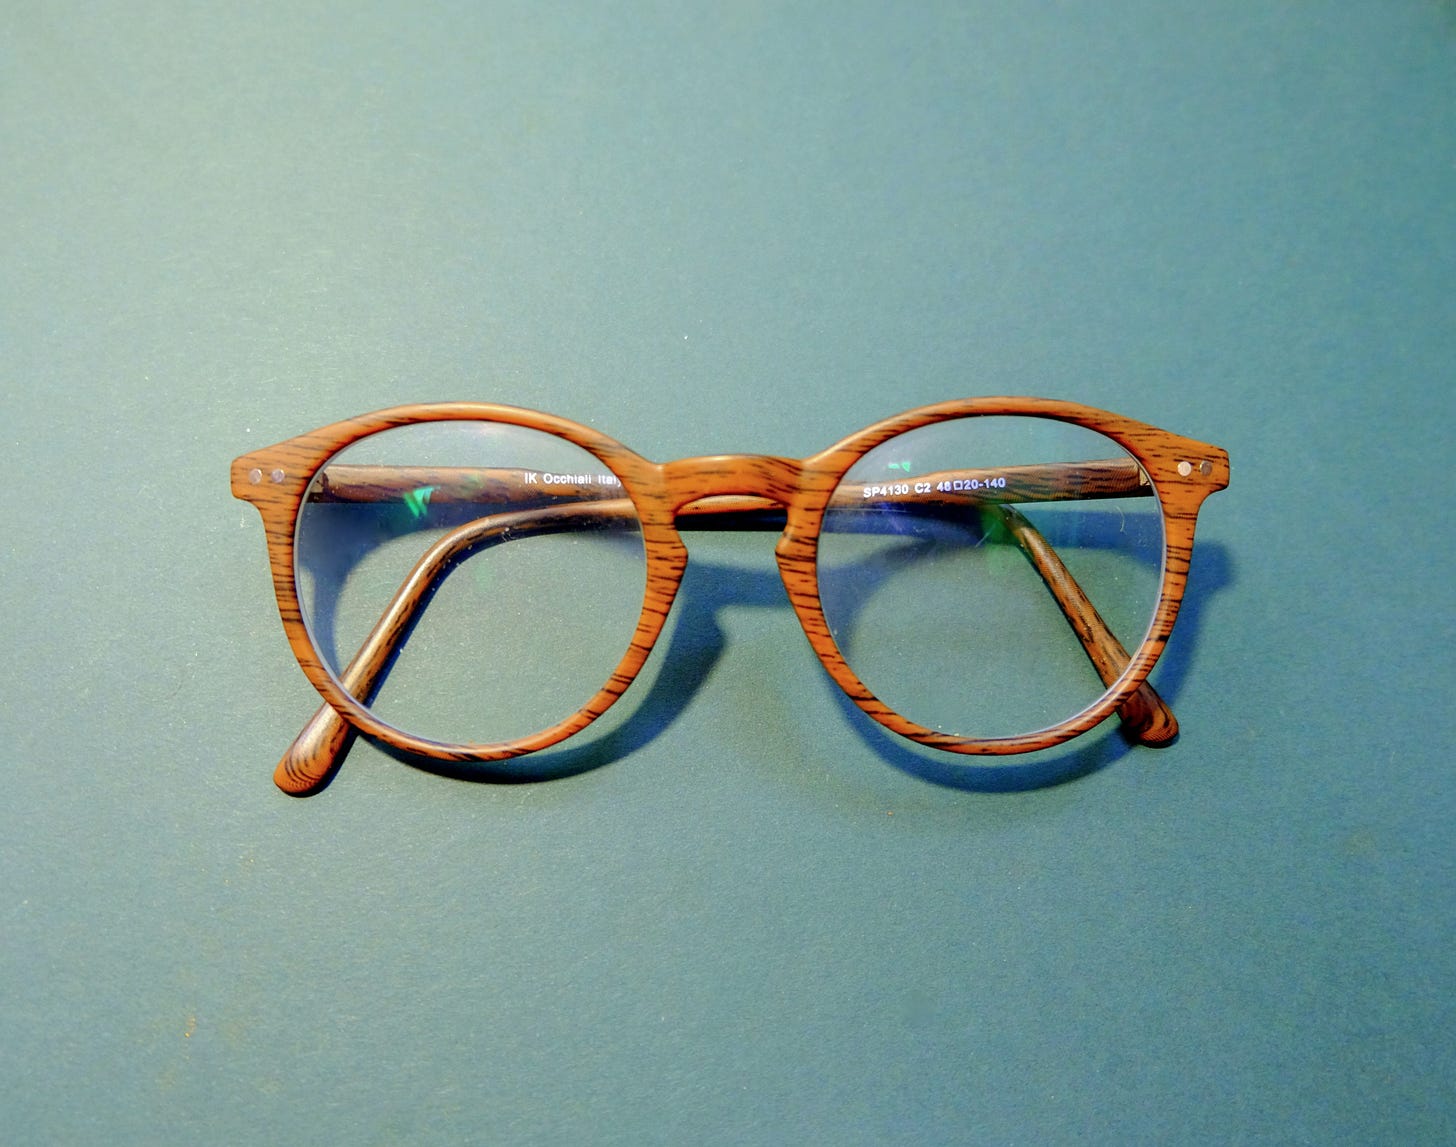 wood grain glasses on a green background